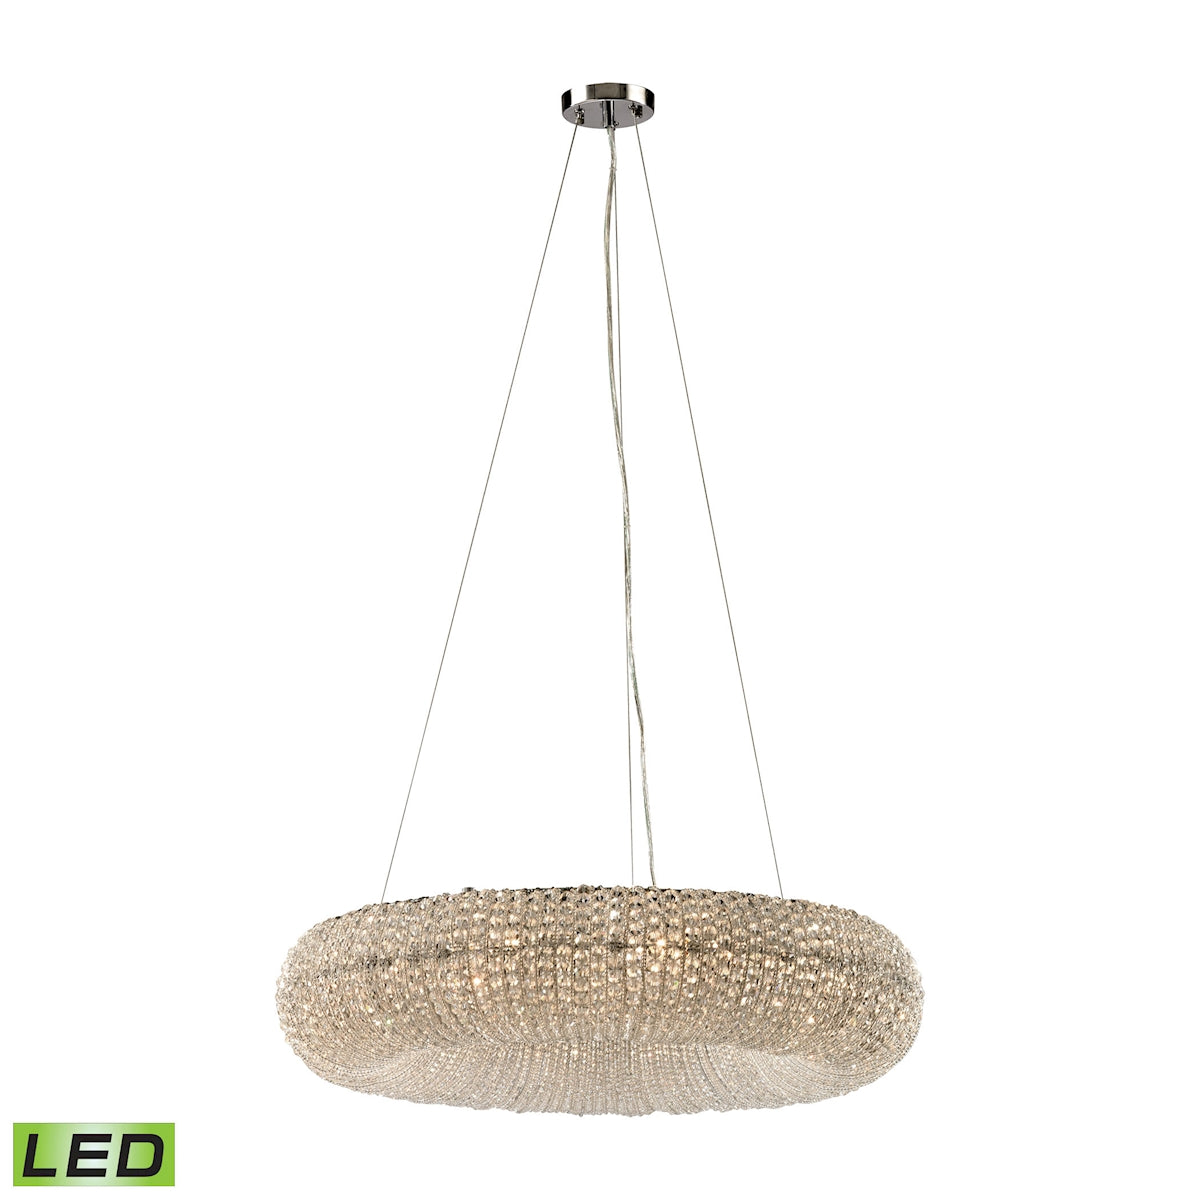 ELK Lighting 45292/10-LED Crystal Ring 10-Light Chandelier in Chrome with Clear Crystal Beads - Includes LED Bulbs